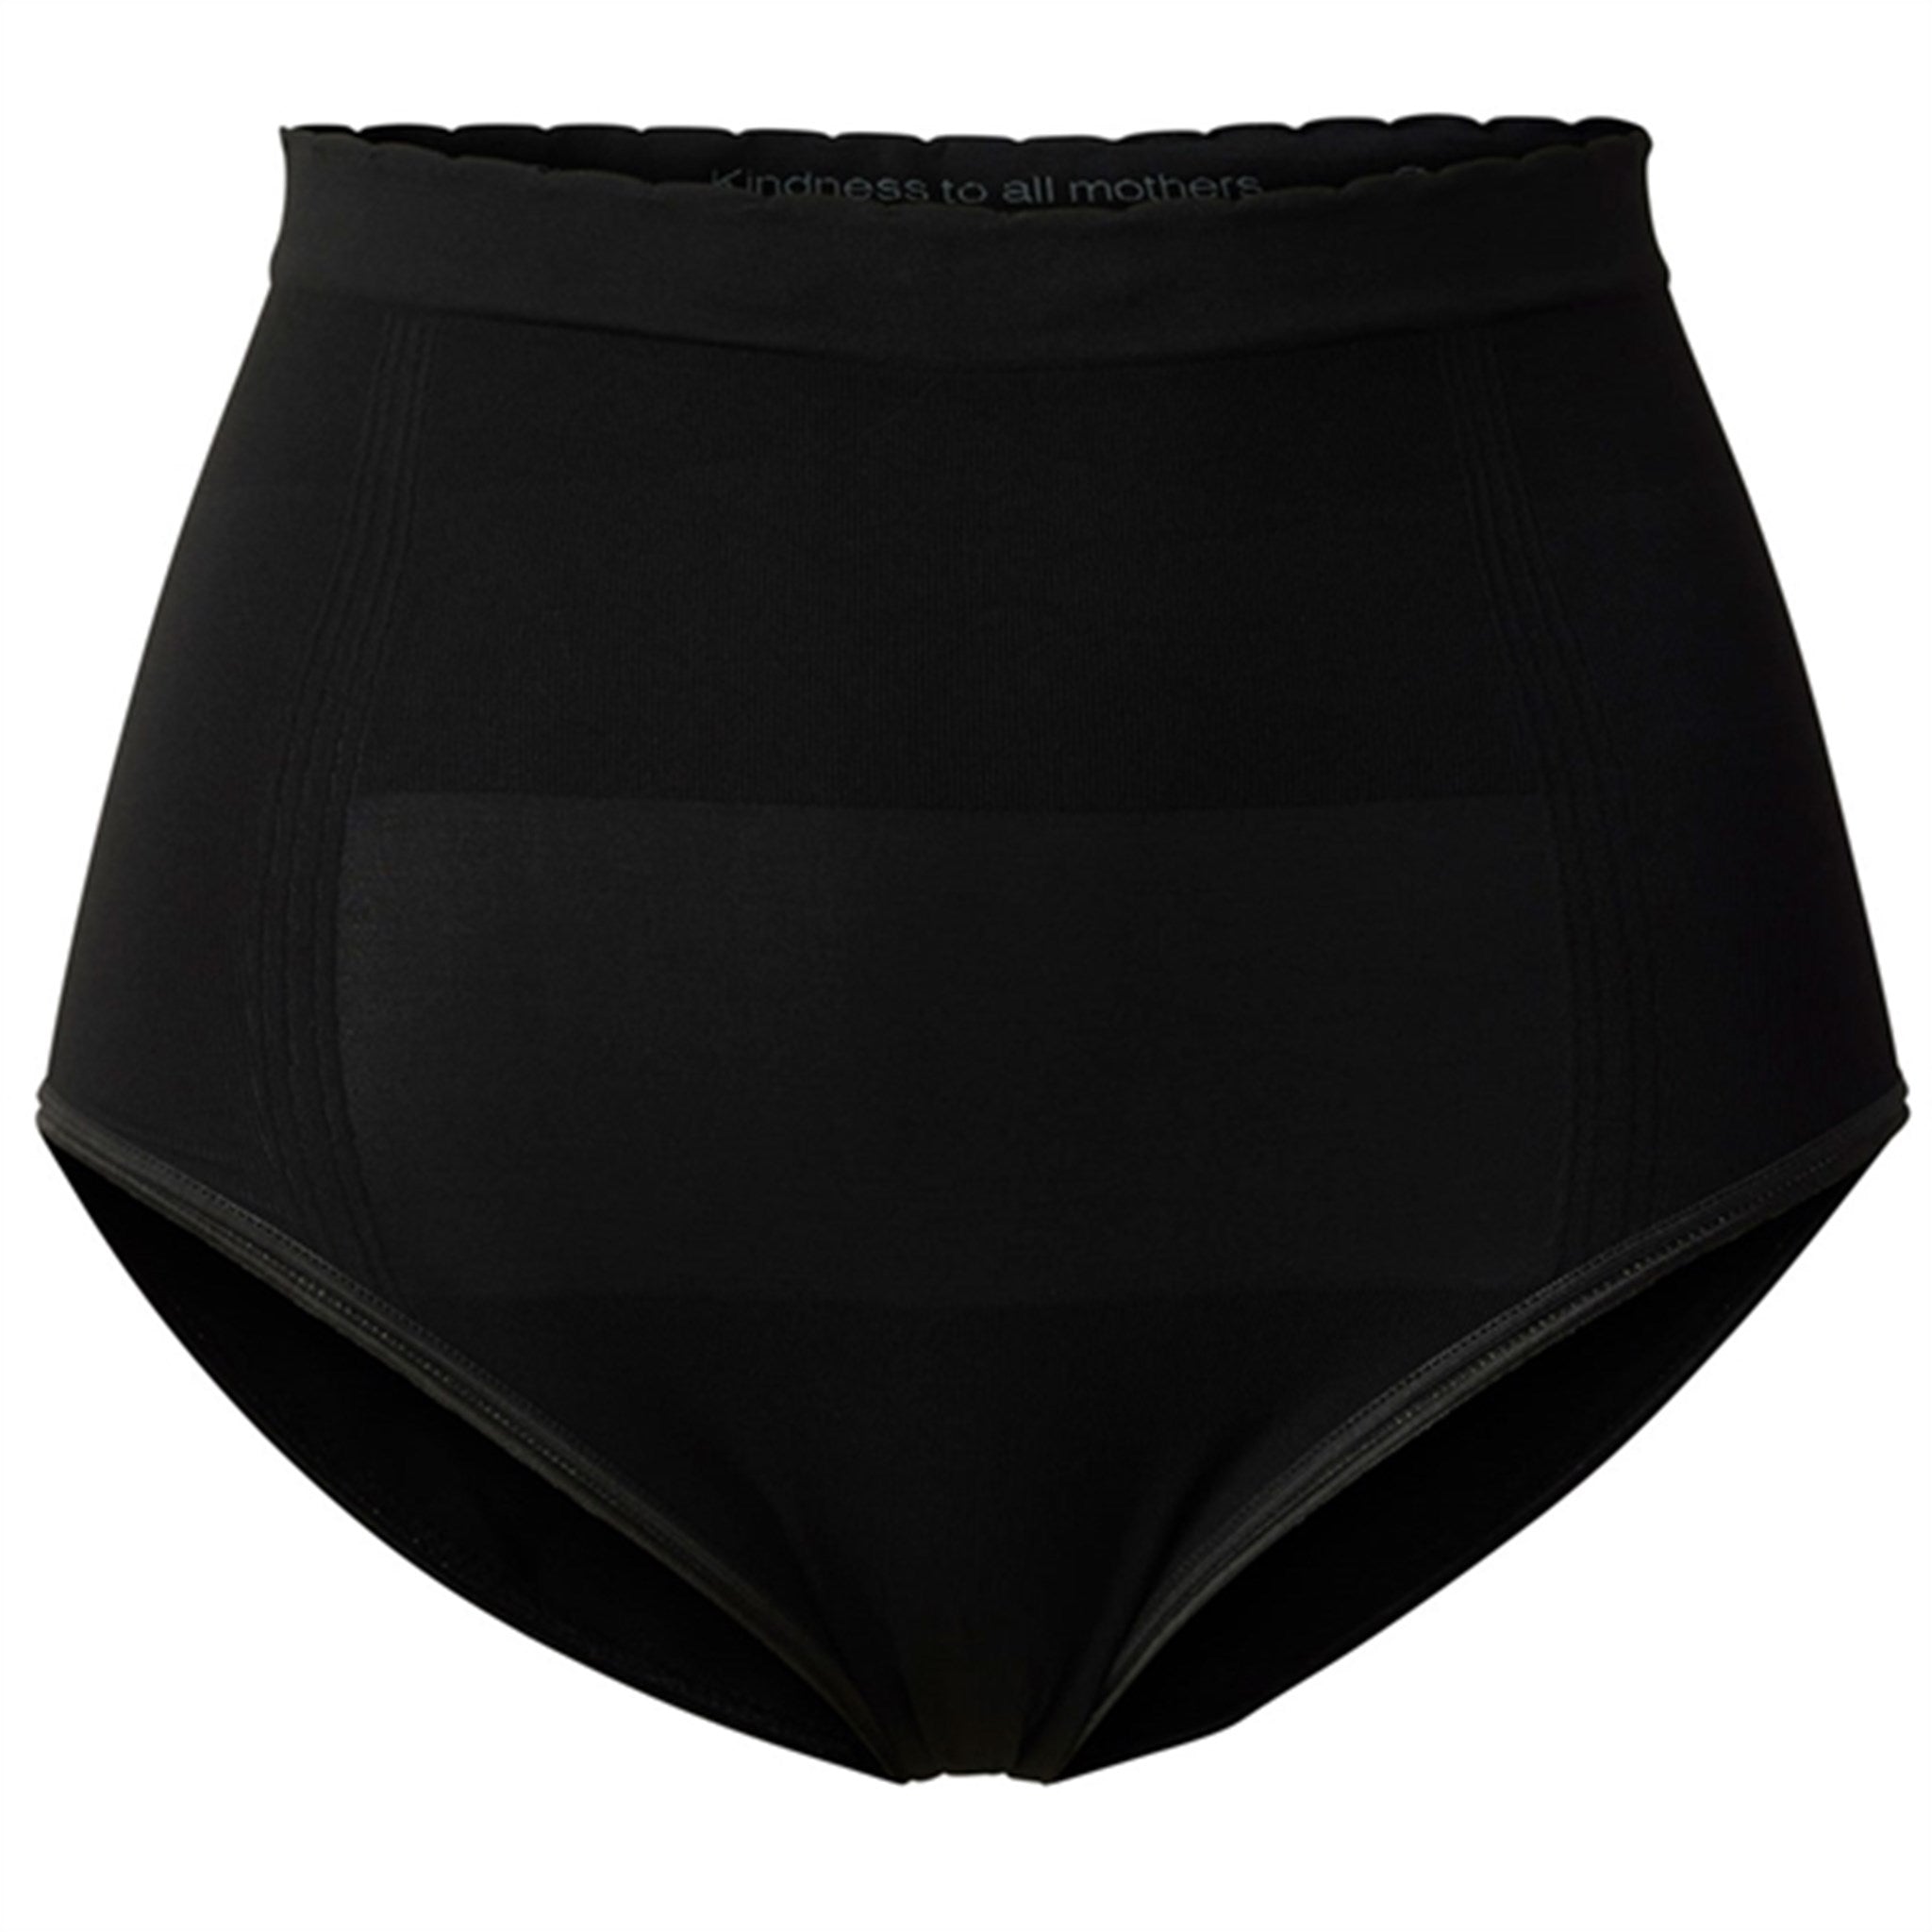 momkind C-section Panties – Support Scar and Belly Black